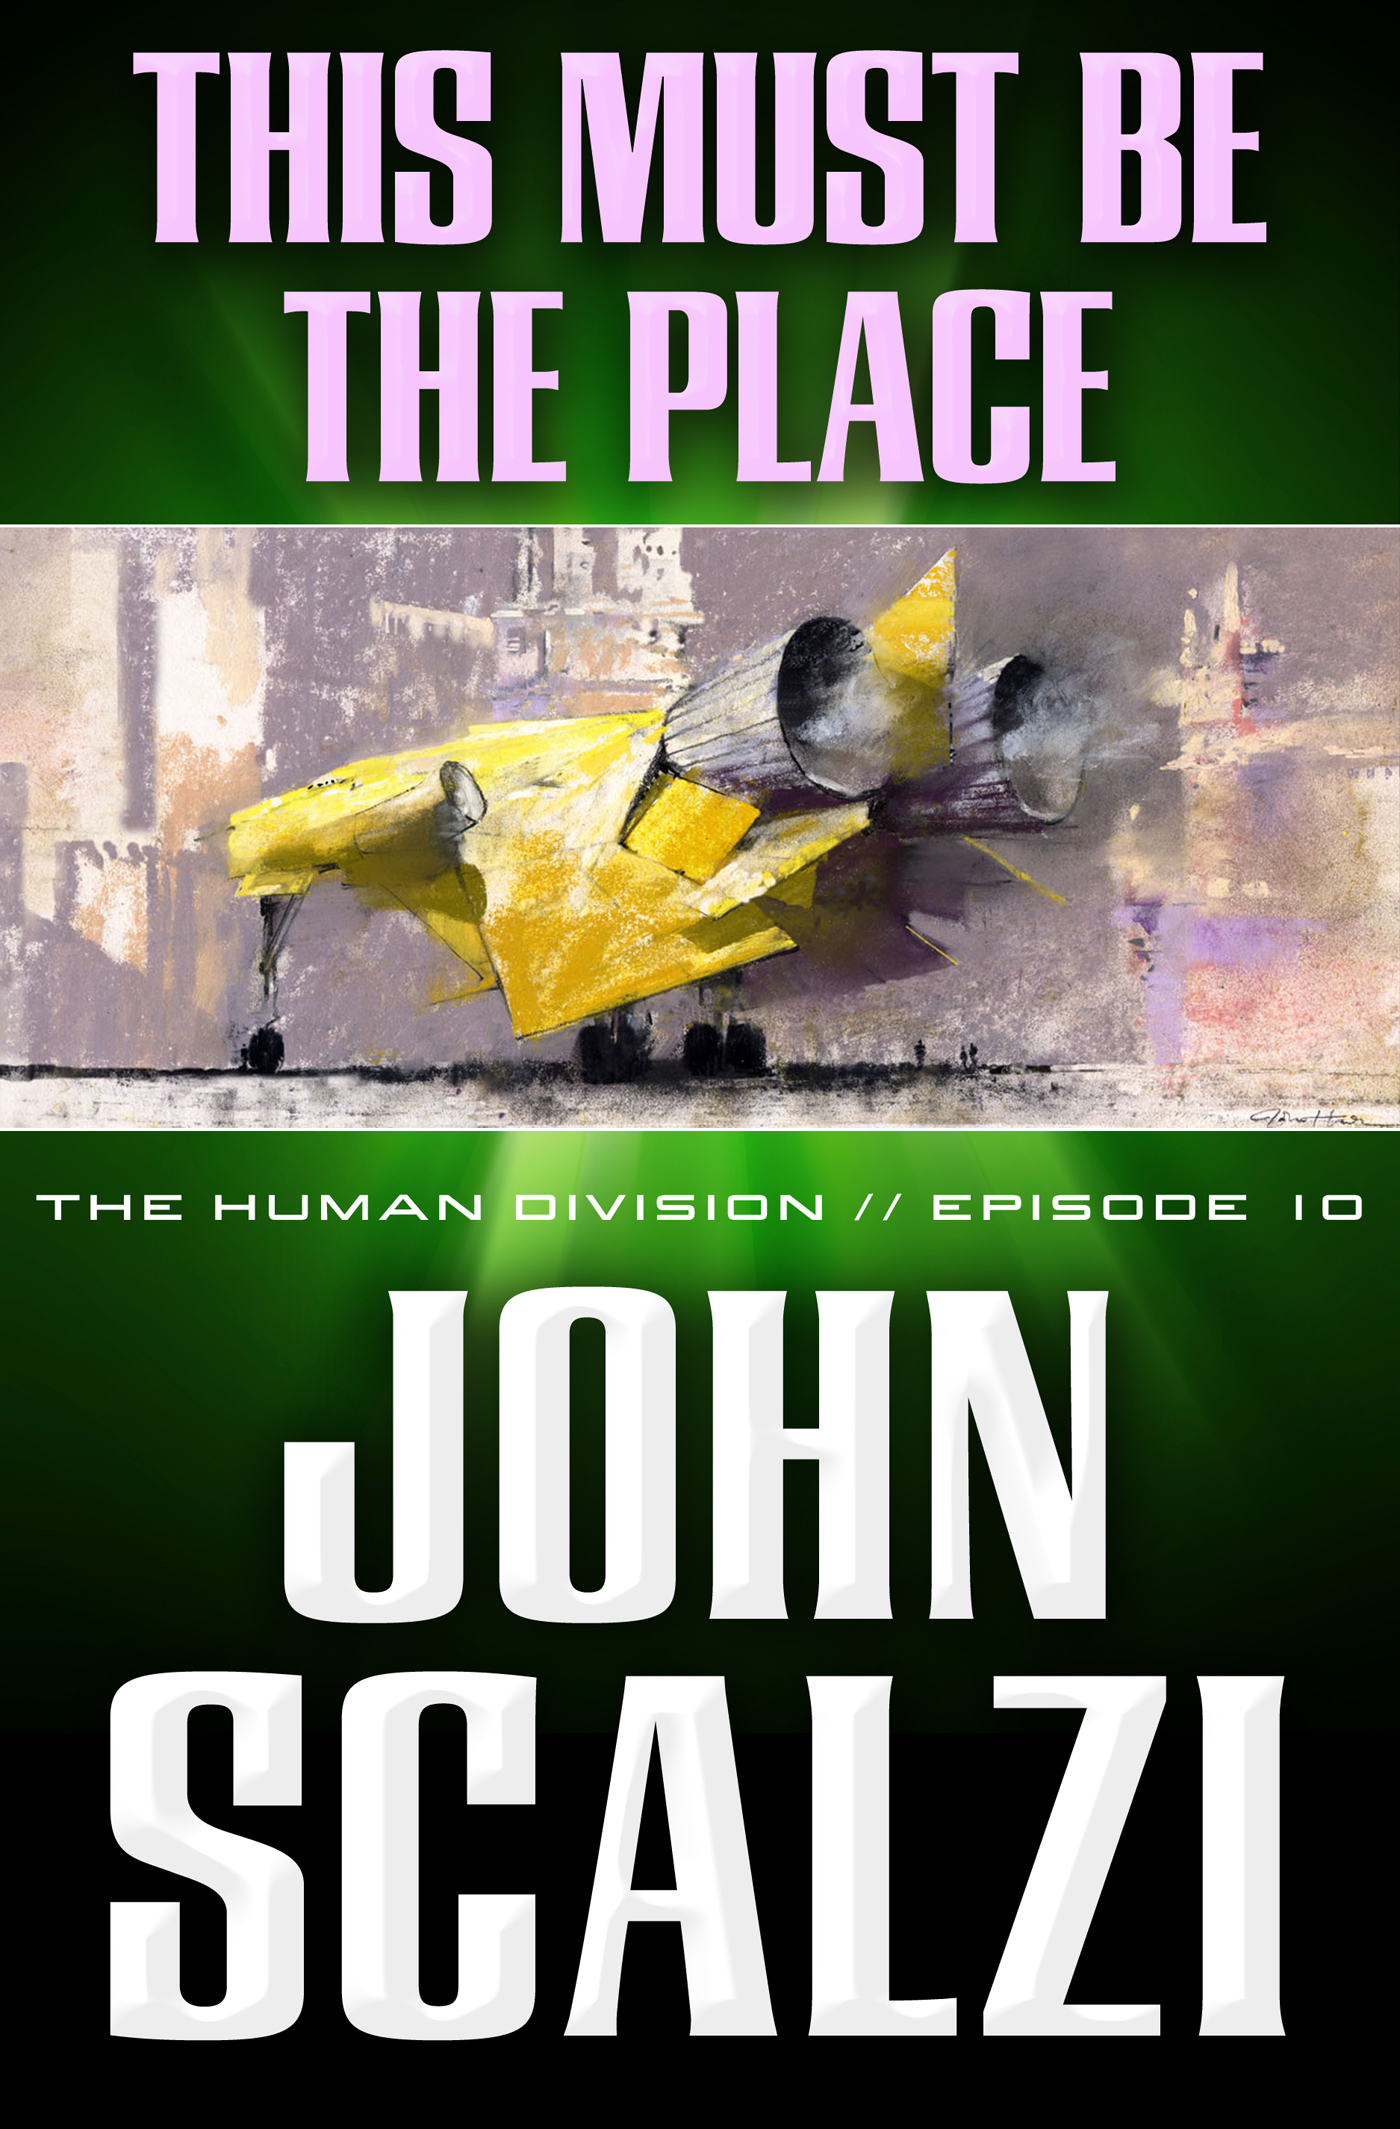 The Human Division #10: This Must Be the Place by John Scalzi